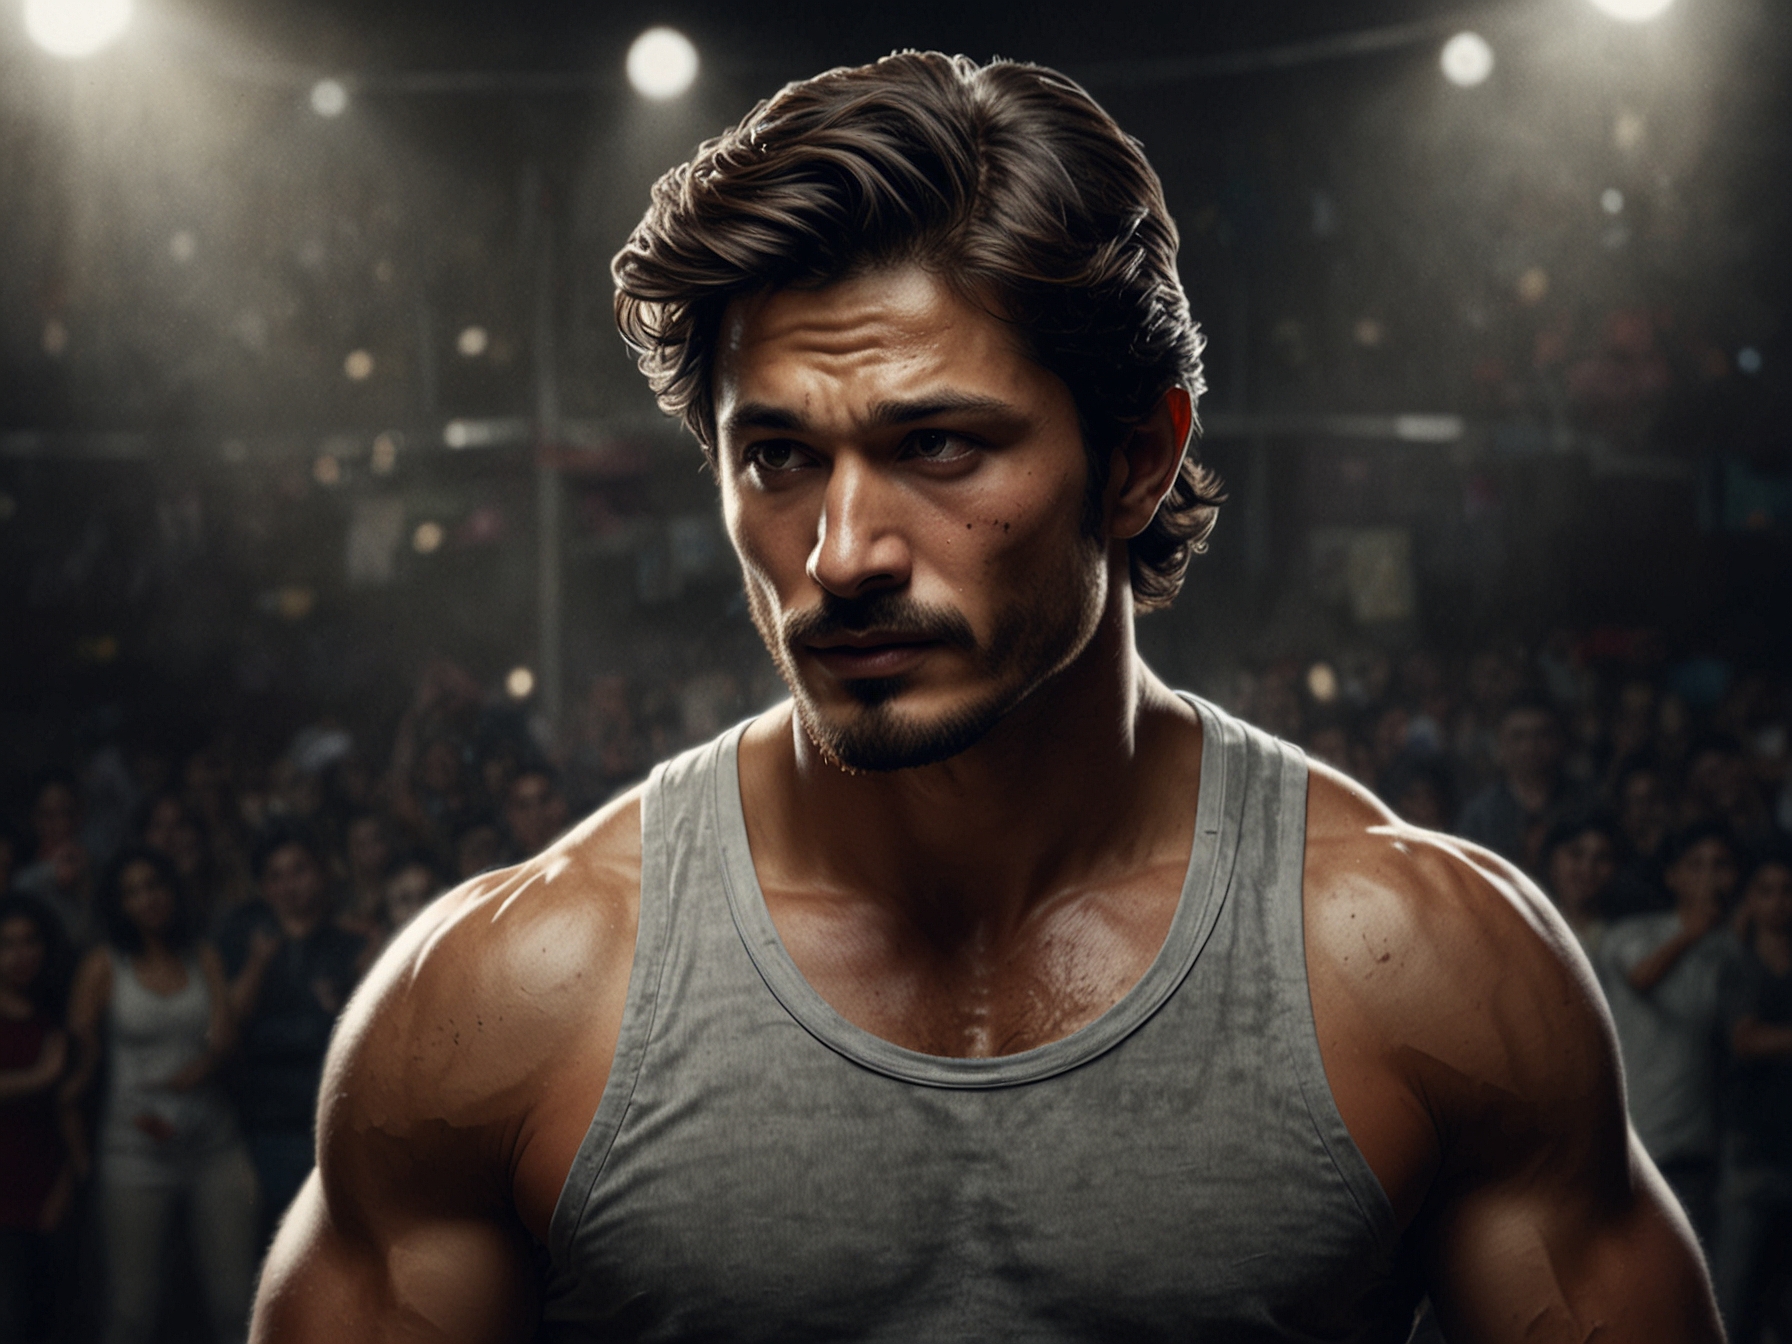 A behind-the-scenes glimpse of Vidyut Jammwal's life in the circus, illustrating his physical endurance and determination to overcome dire financial challenges.